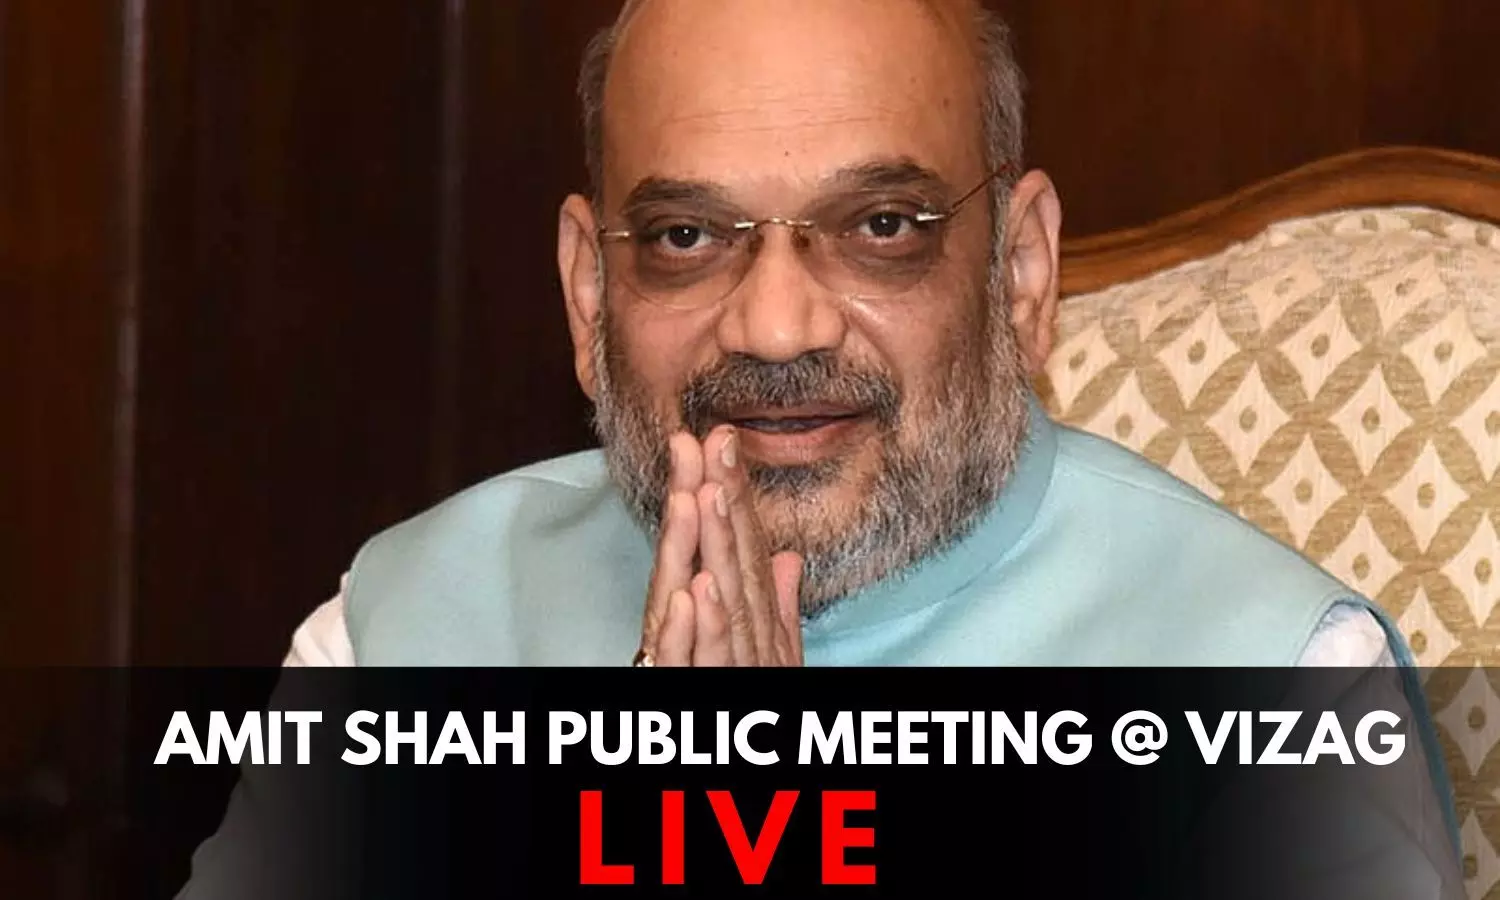 Amit Shahs Public Meeting at Vizag Live Updates: Union Home Minster Amit shah reached venue of public meeting at vizag